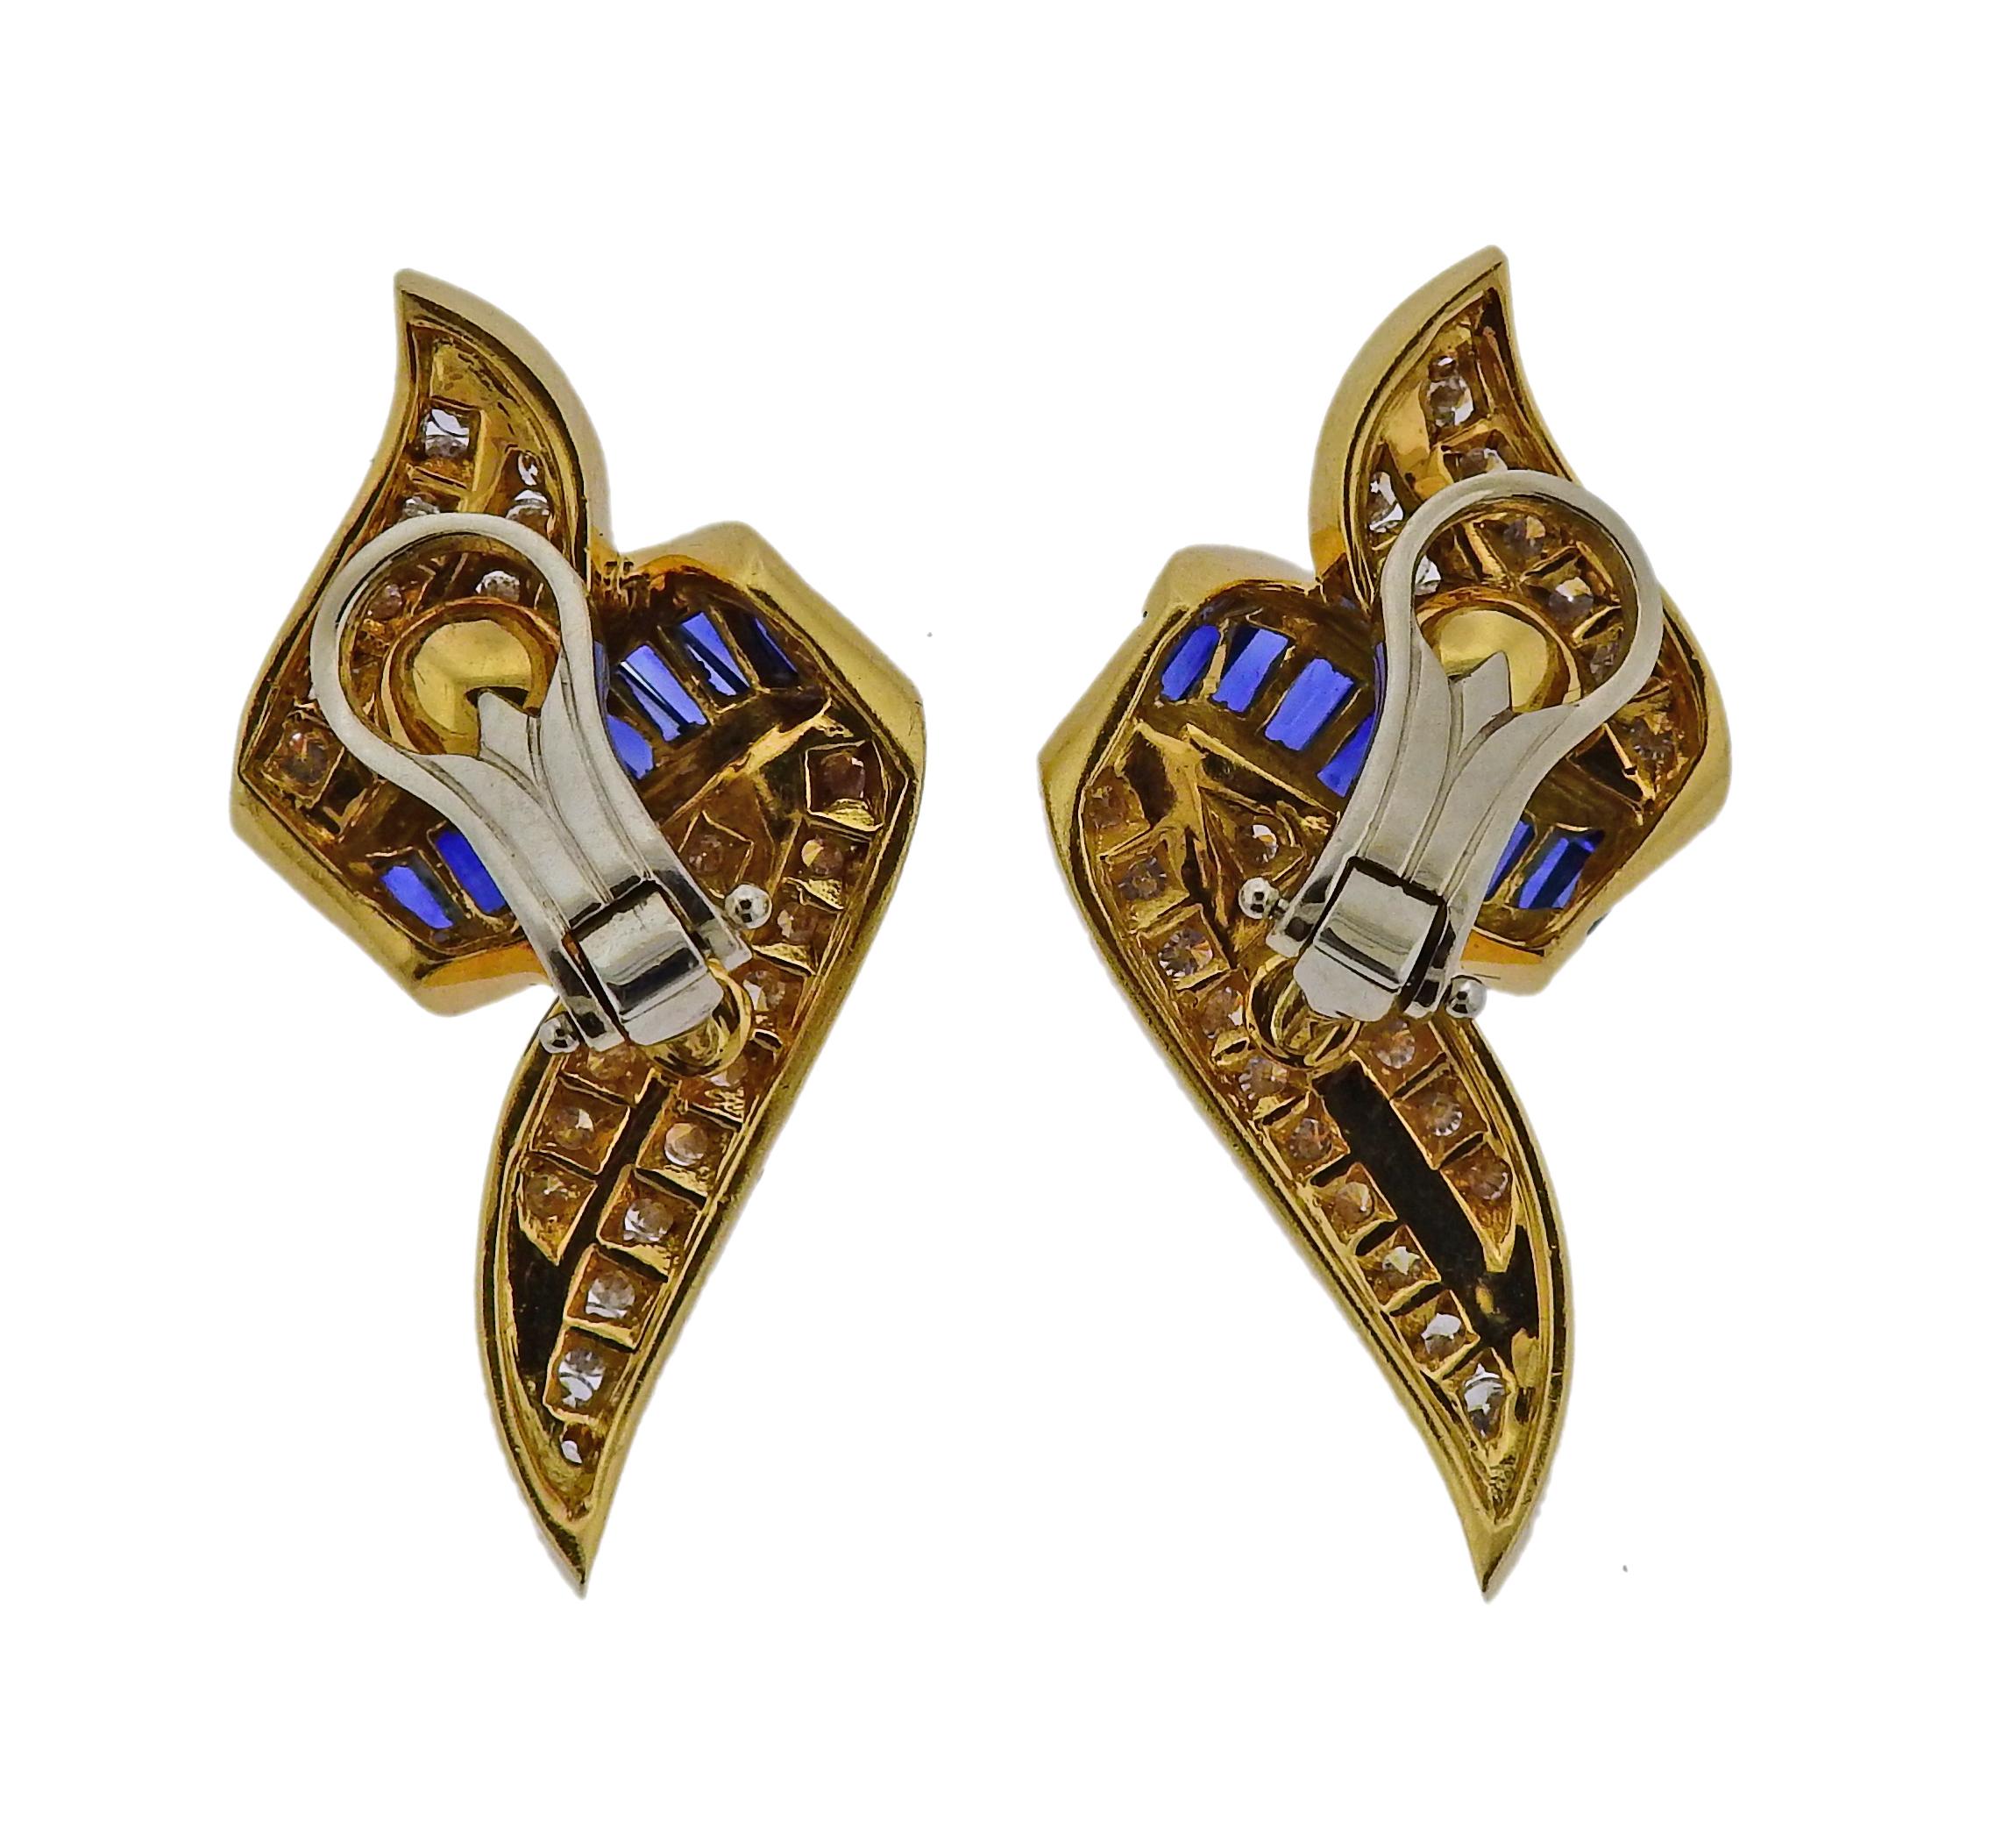 Pair of 18k gold earrings by Charles Krypell, set with blue sapphires and approx. 1.80ctw in G/VS diamonds.  Earrings are measured 36mm x 19mm. 
Weight is 20.3 grams. Marked:  Krypell, 750. 